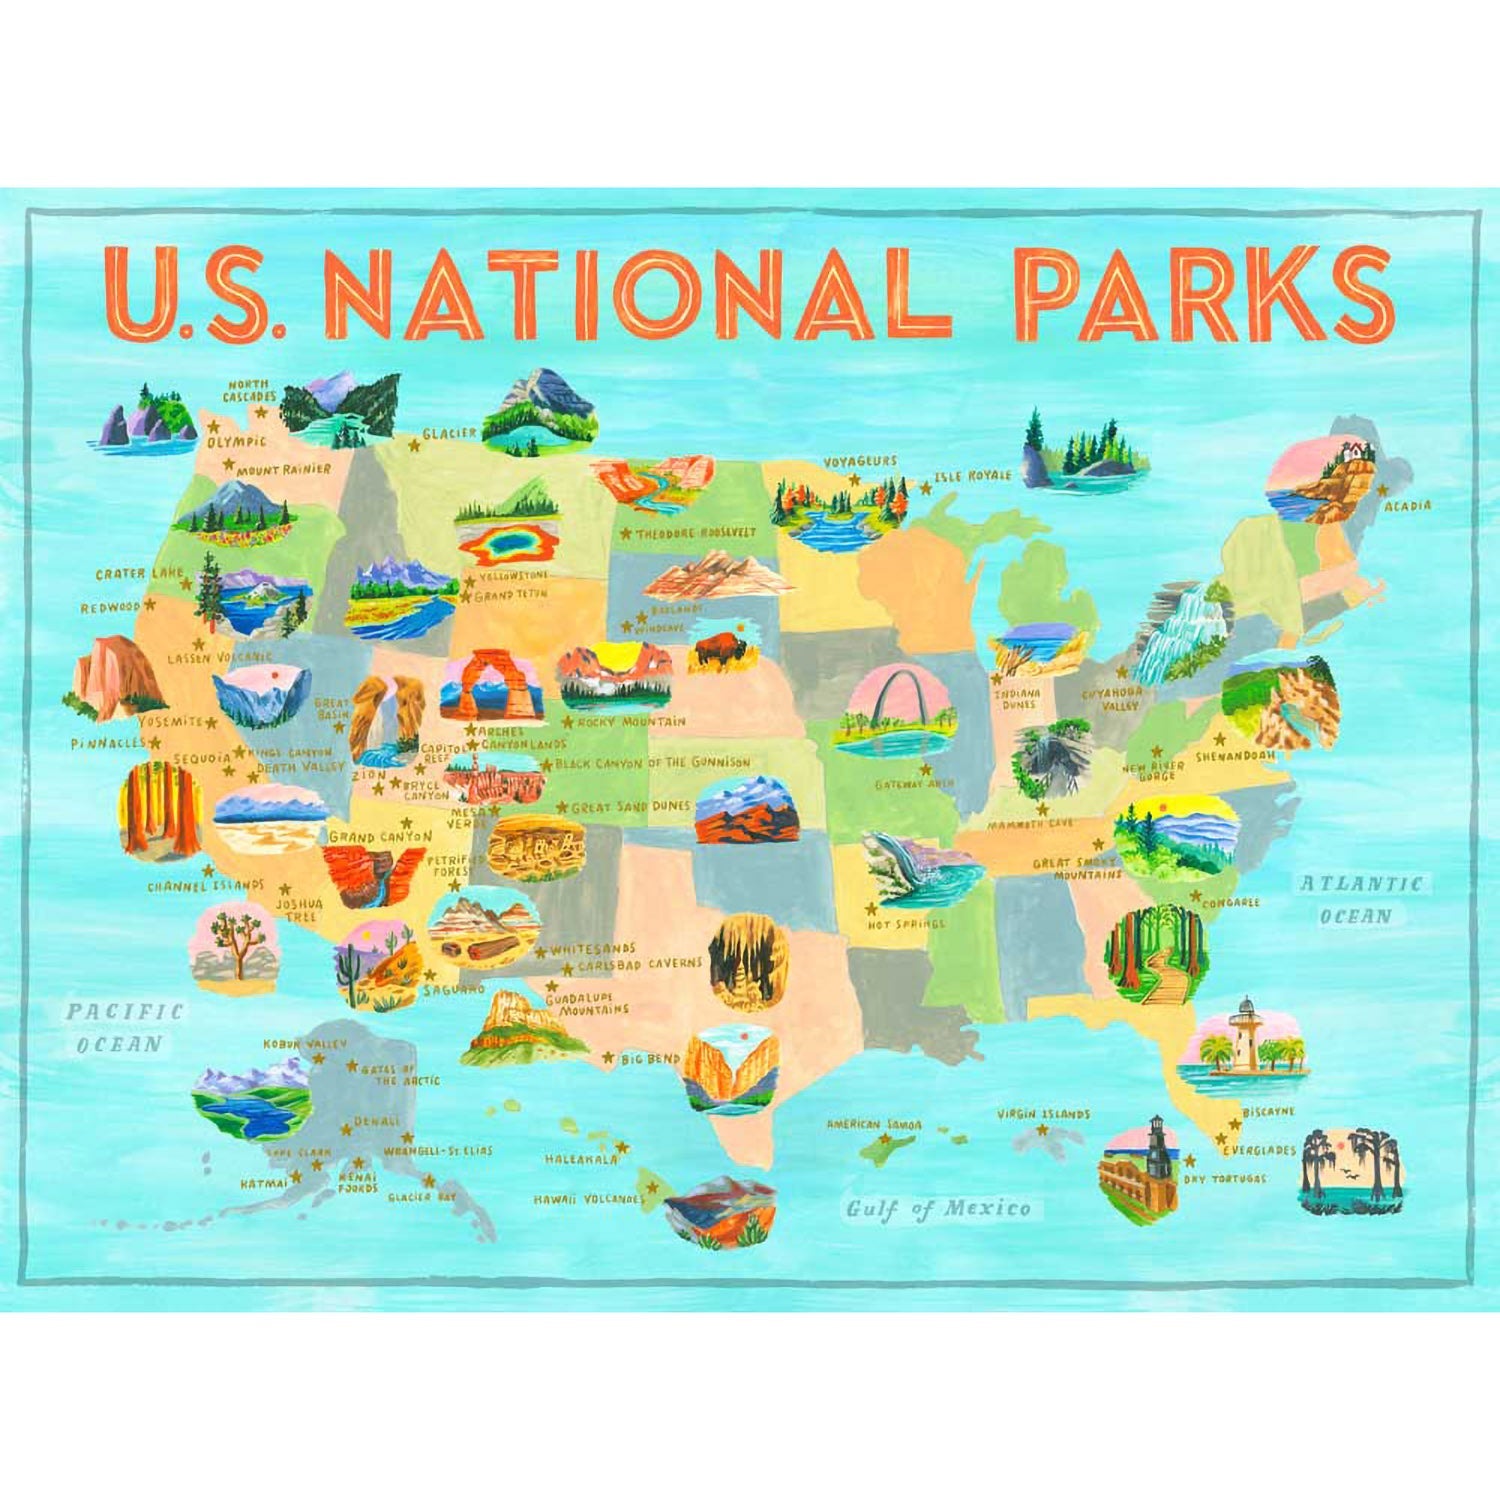 National Parks - United States - Blue Canvas Wall Art - GreenBox Art